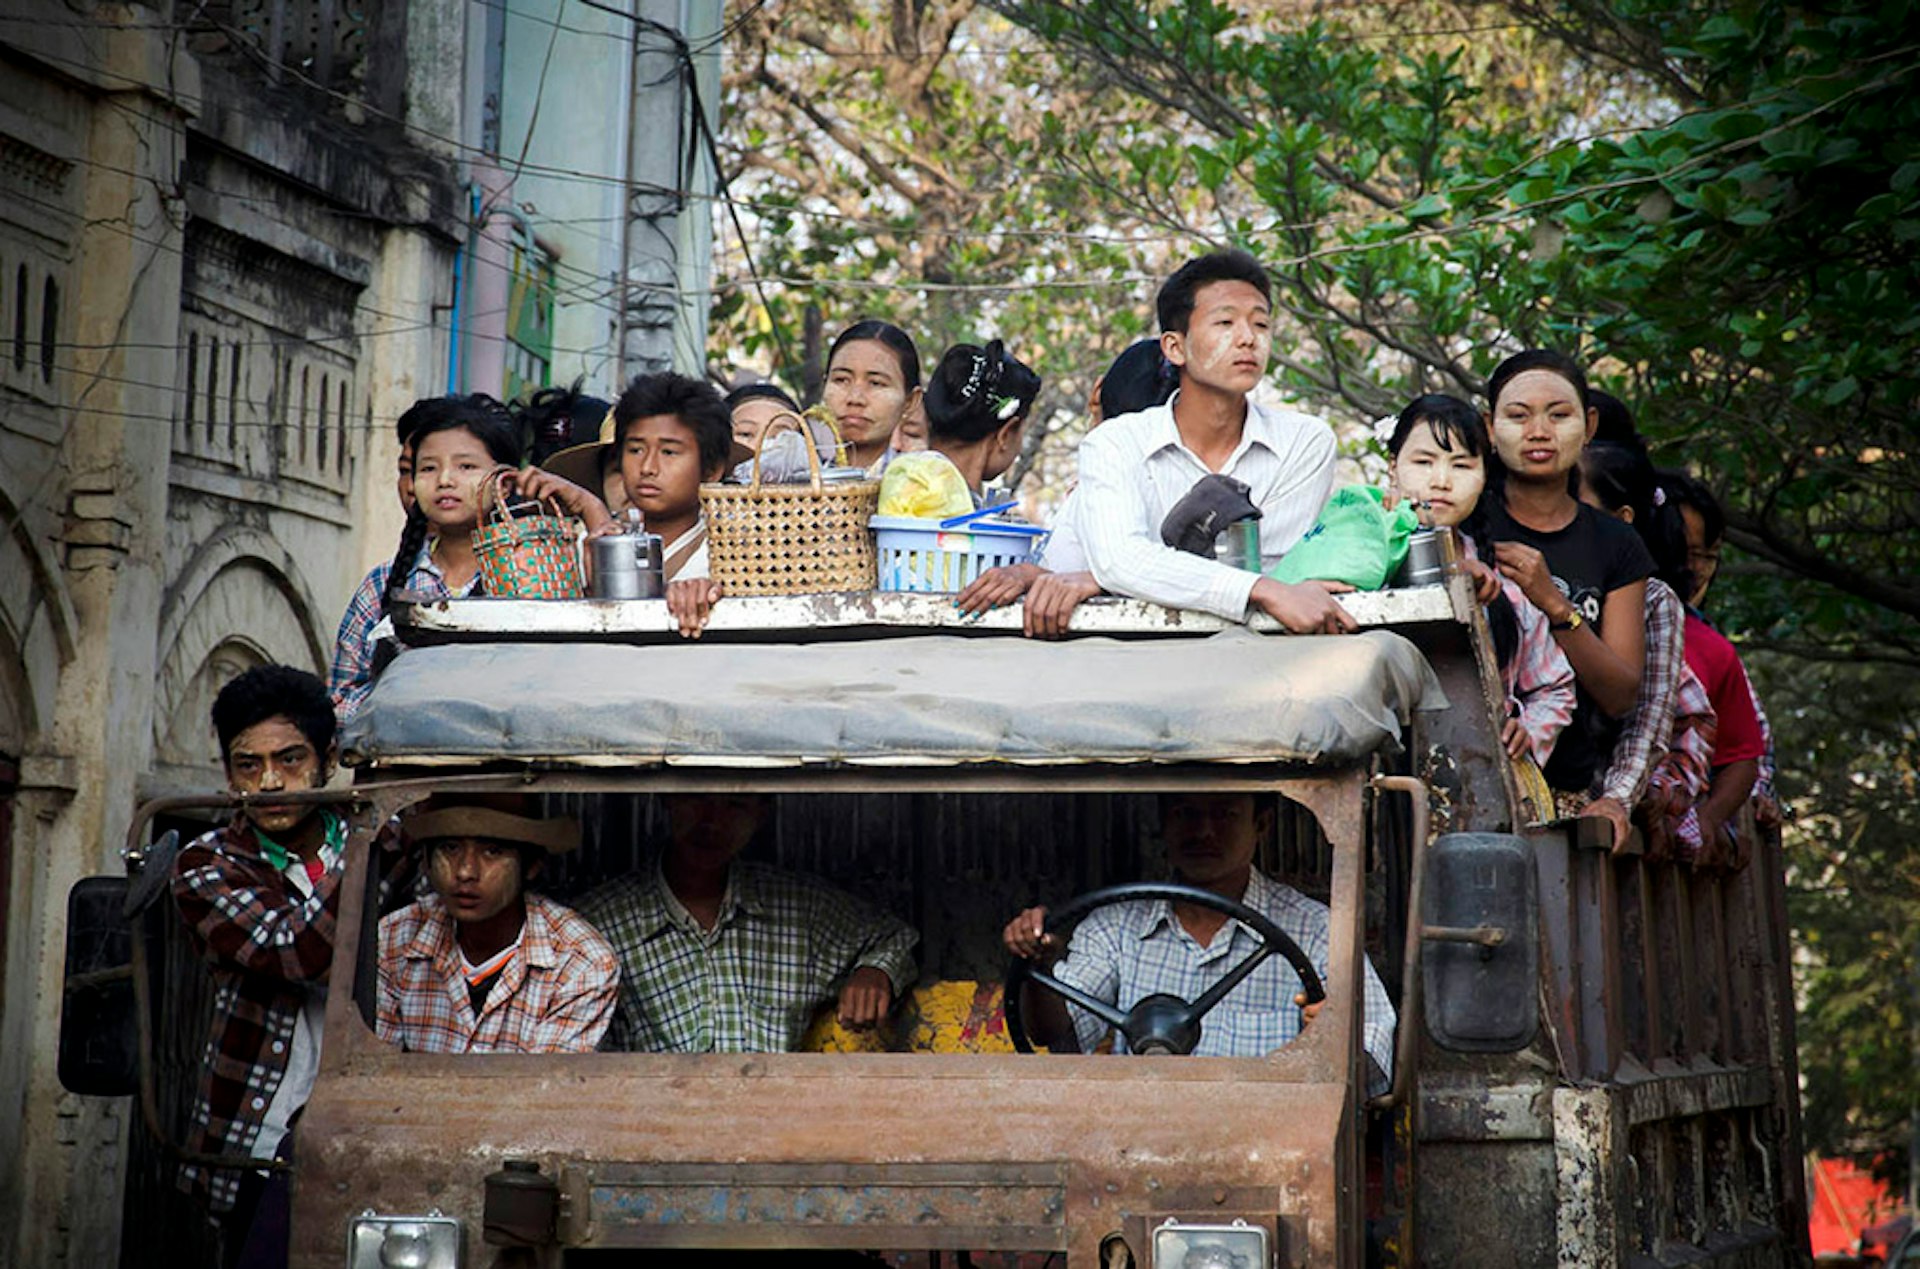 Revealing images of Myanmar; a country enjoying its first years of freedom